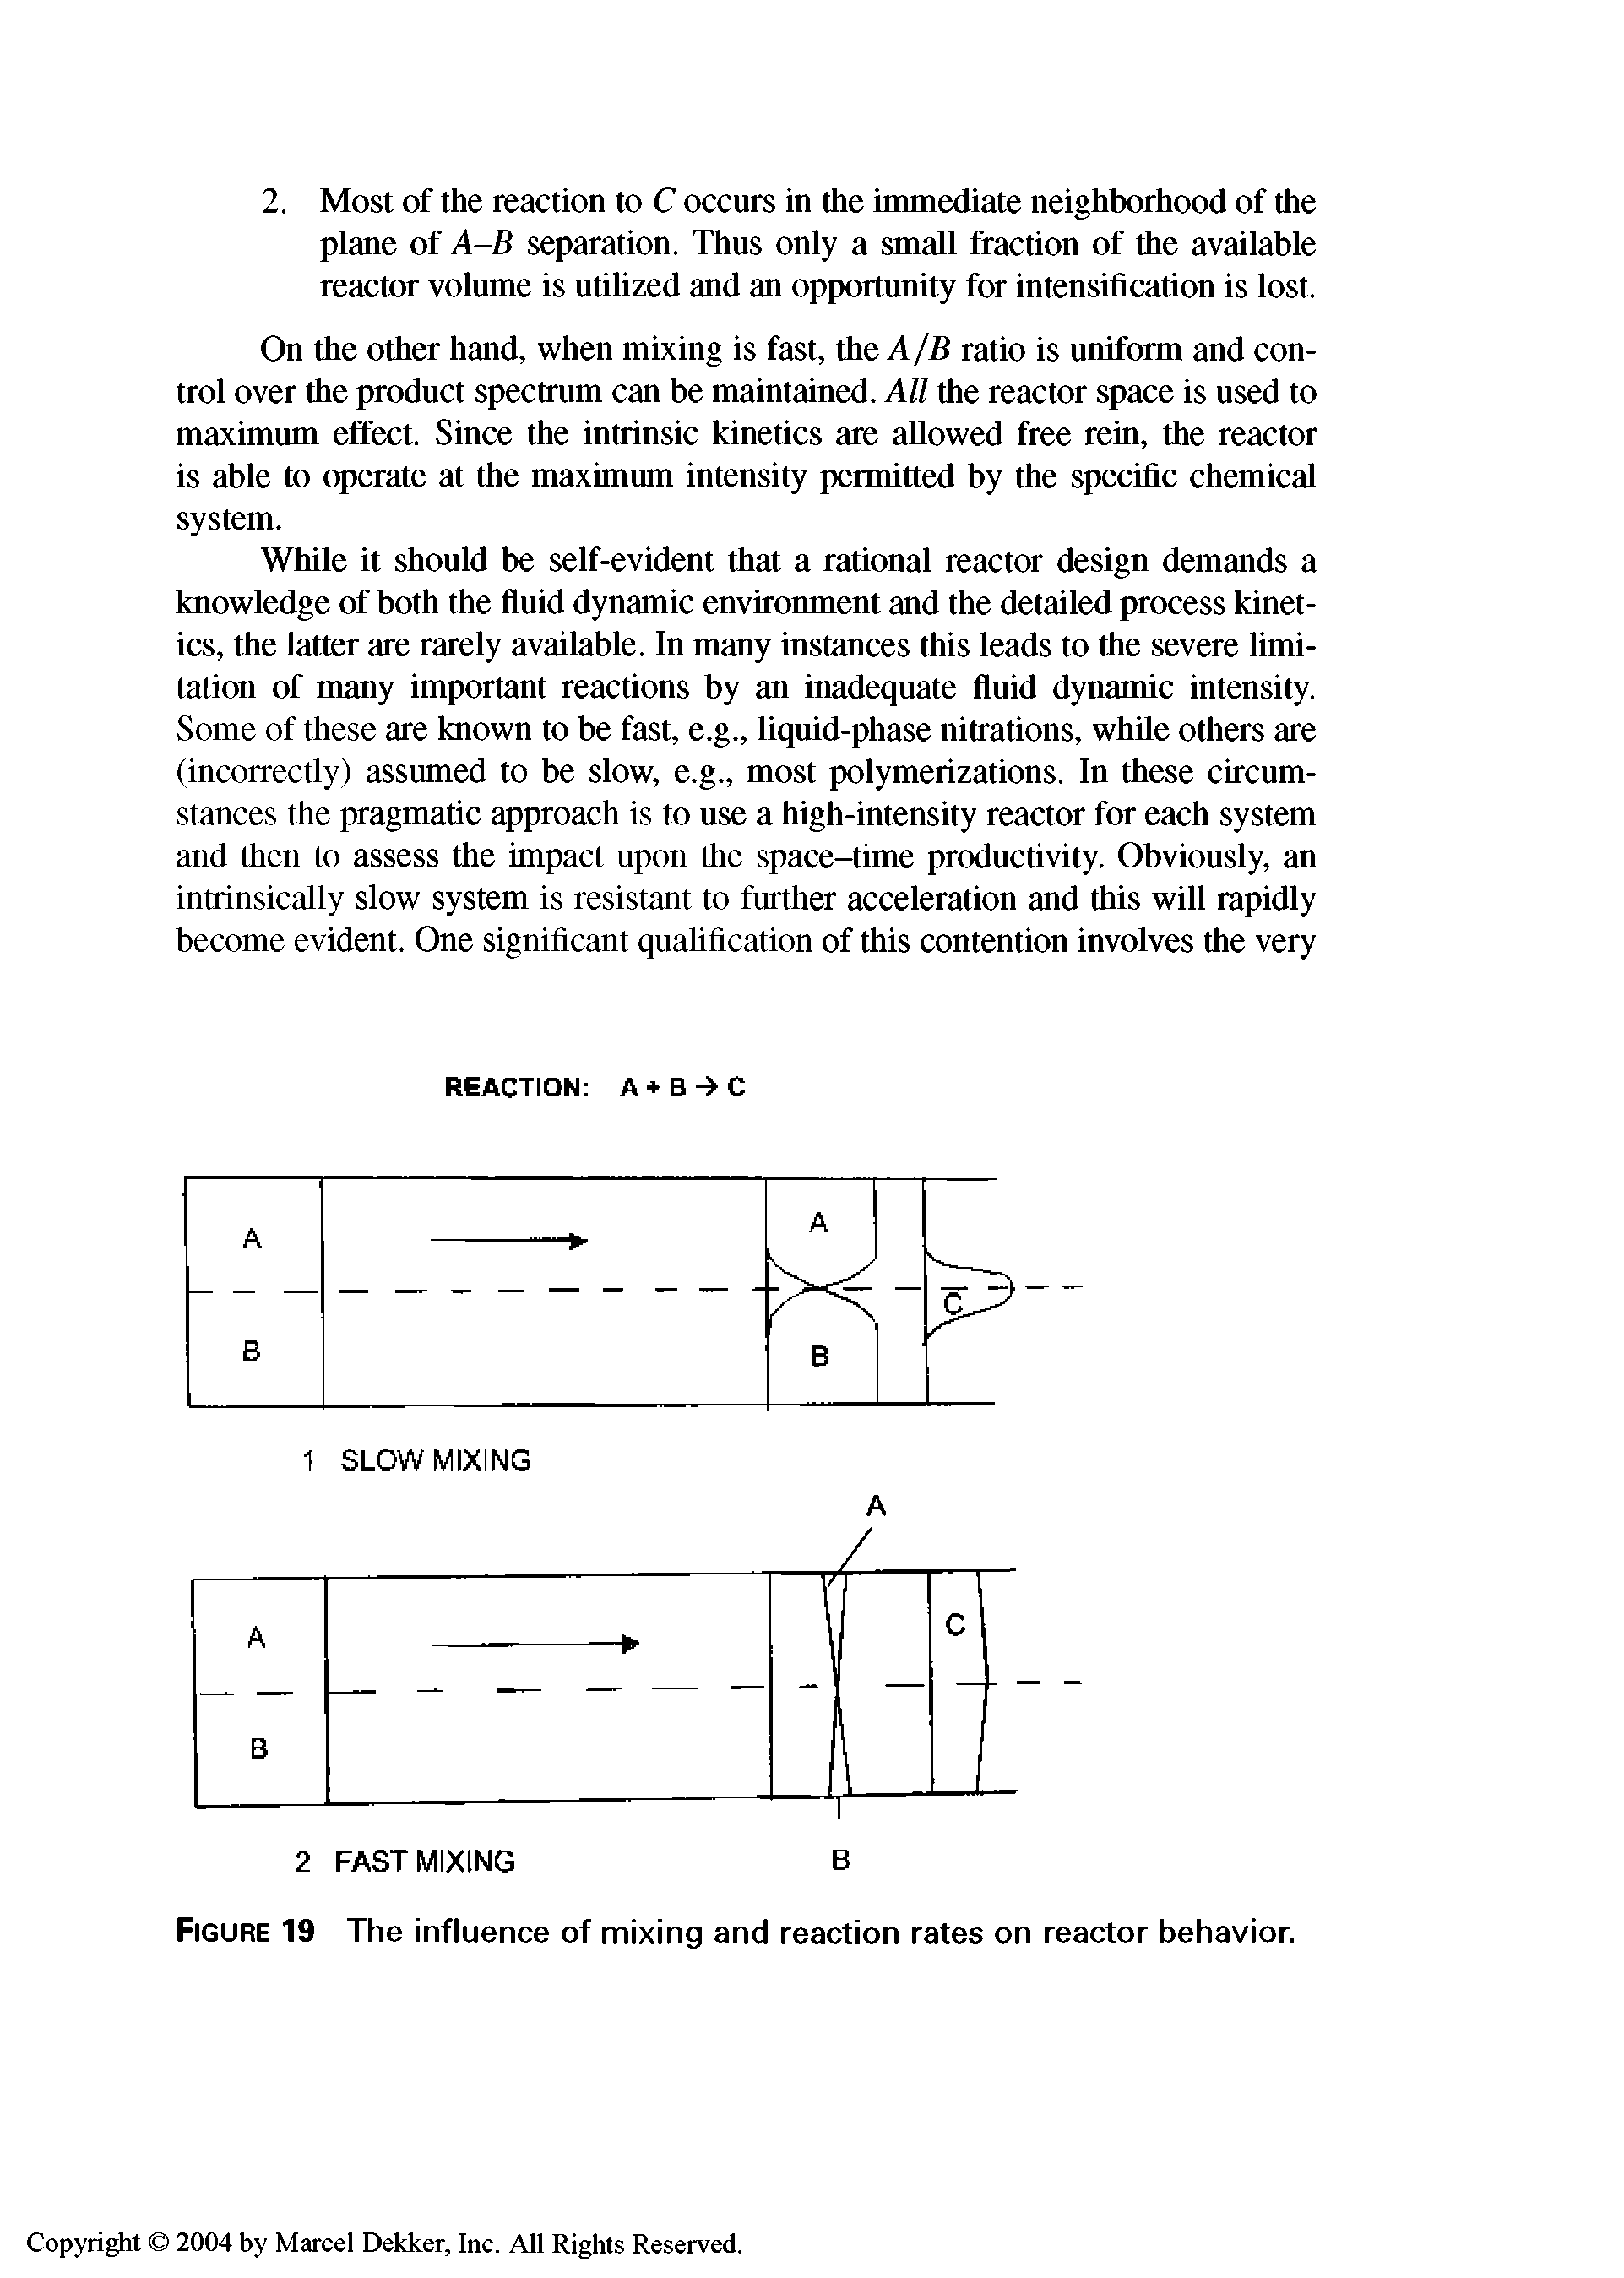 Figure 19 The influence of mixing and reaction rates on reactor behavior.